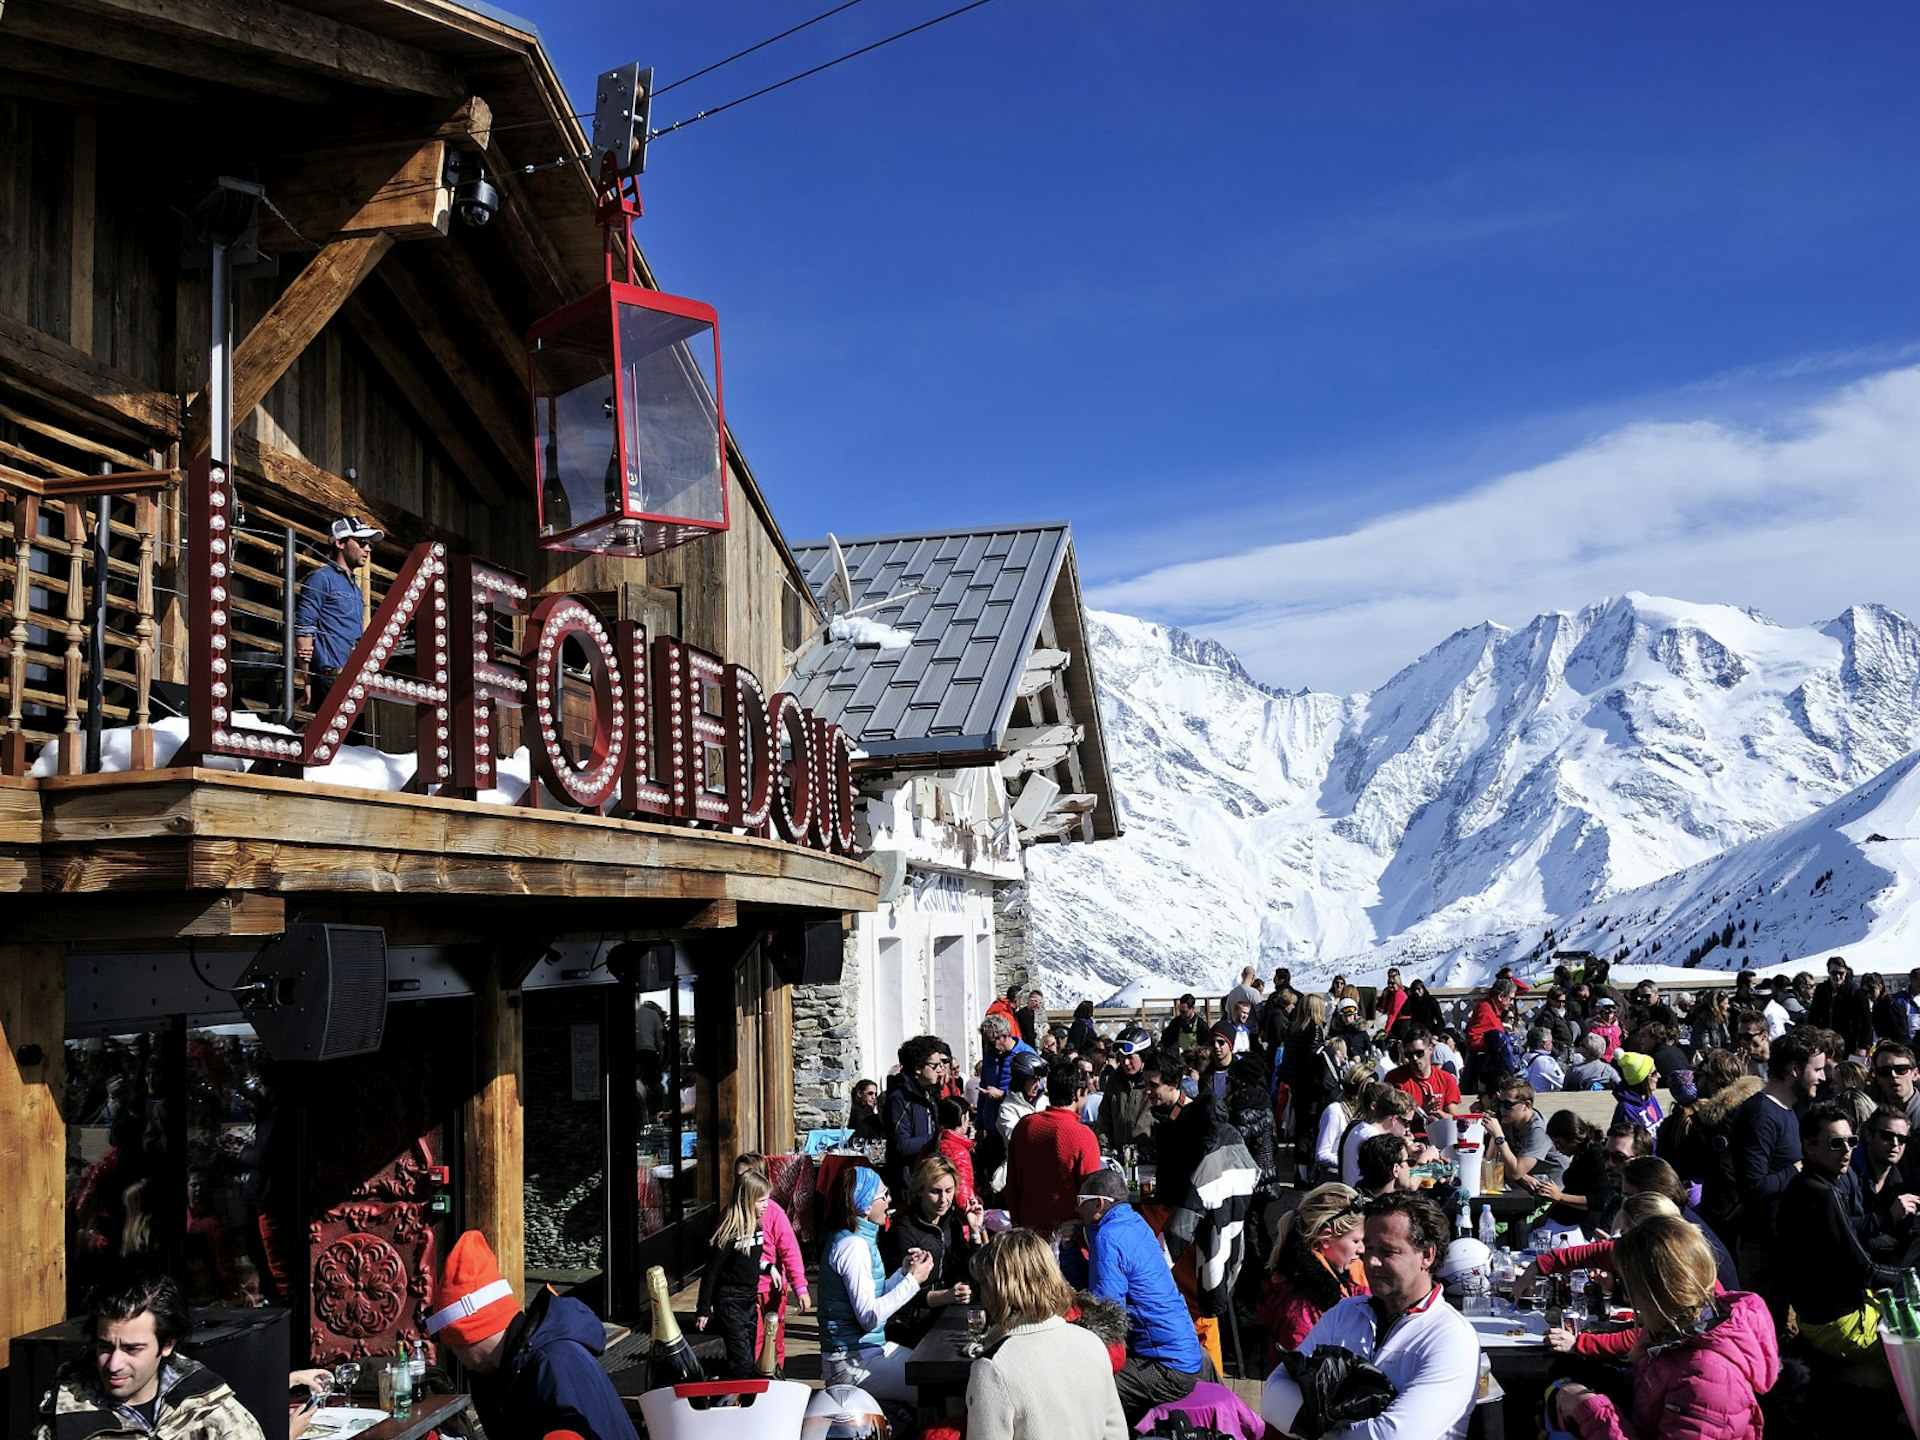 La Folie Douce, a bar at the top of a 2500m-high slope on the Alps